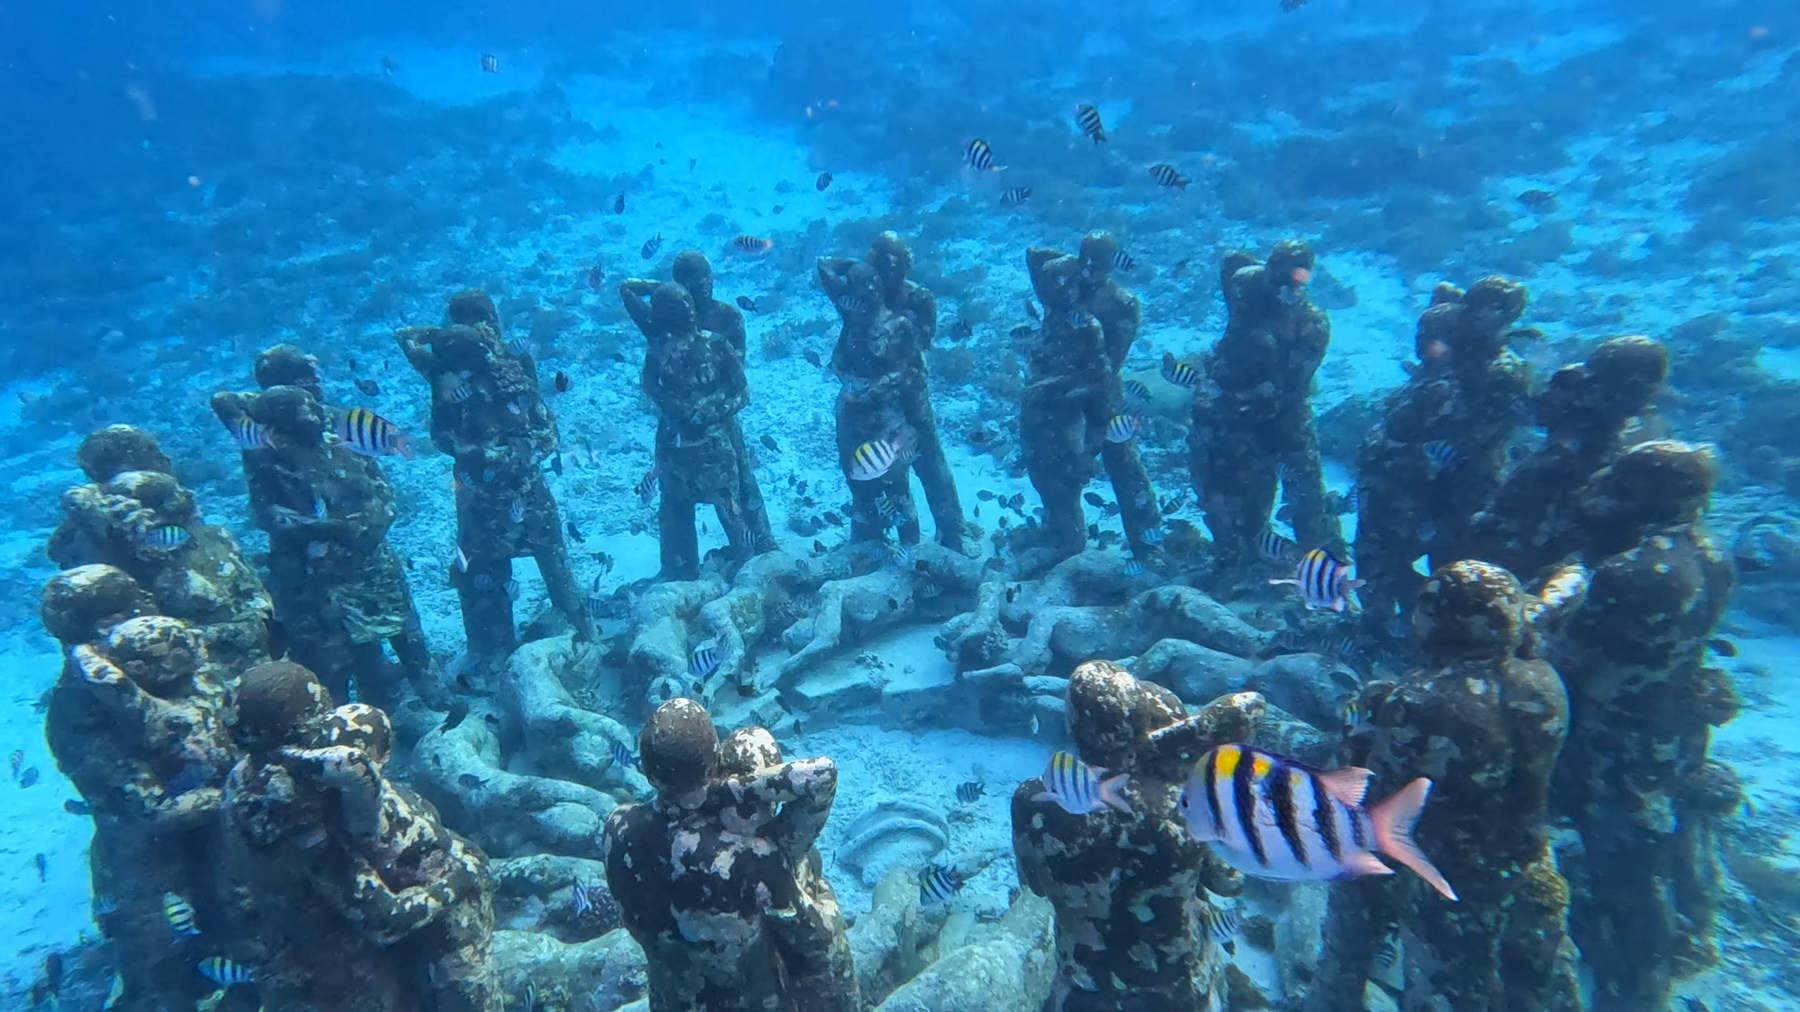 Image Underwater statues, Turtle and corals snorkelling